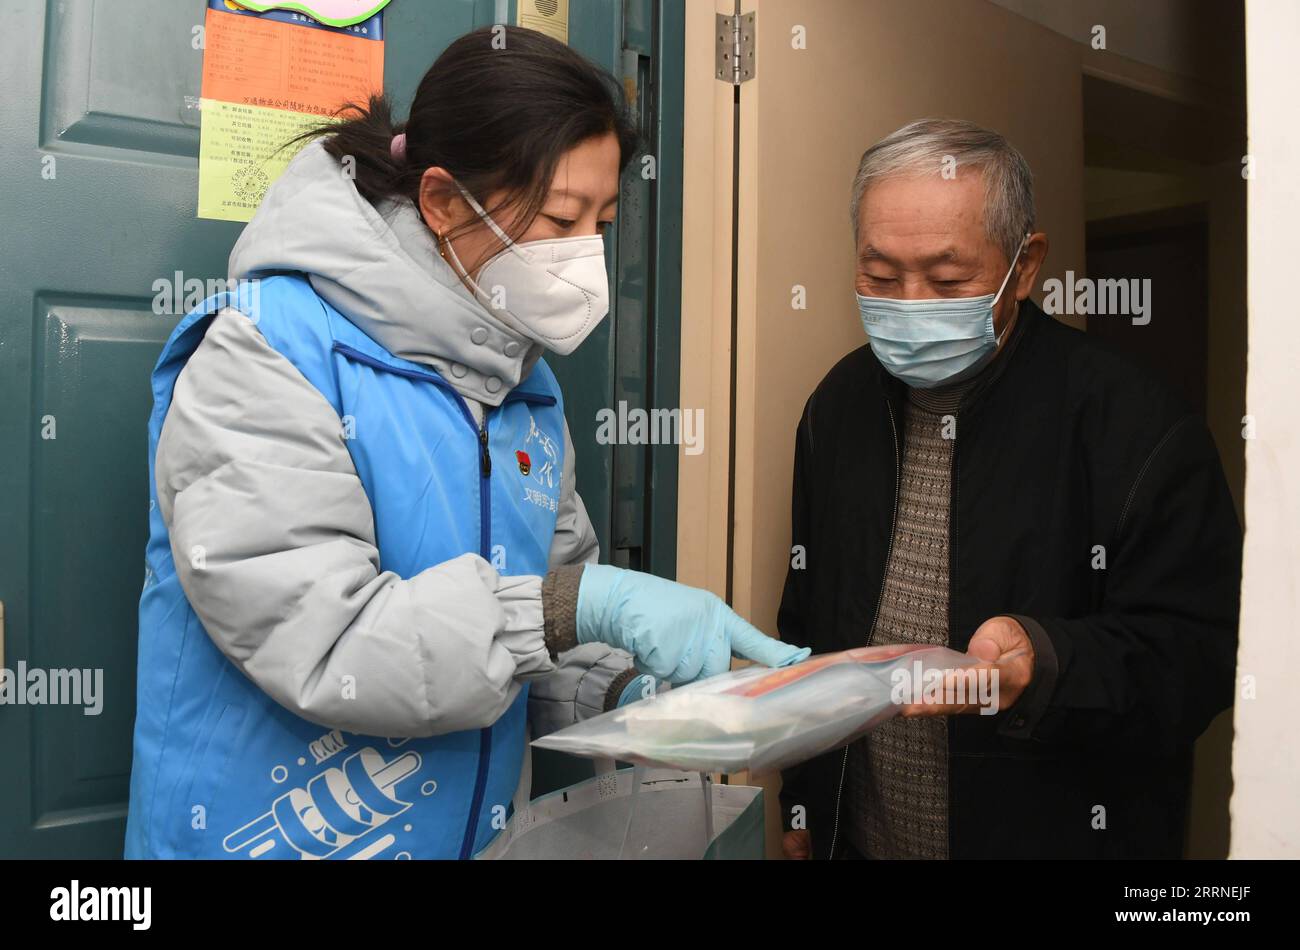 230107 -- BEIJING, Jan. 7, 2023 -- A community worker L explains a COVID-19 prevention and care package to a resident in Yangfangdian Subdistrict of Haidian District in Beijing, capital of China, Dec. 27, 2022.  Xinhua Headlines: Six fallacies and truths about China s epidemic control RenxChao PUBLICATIONxNOTxINxCHN Stock Photo